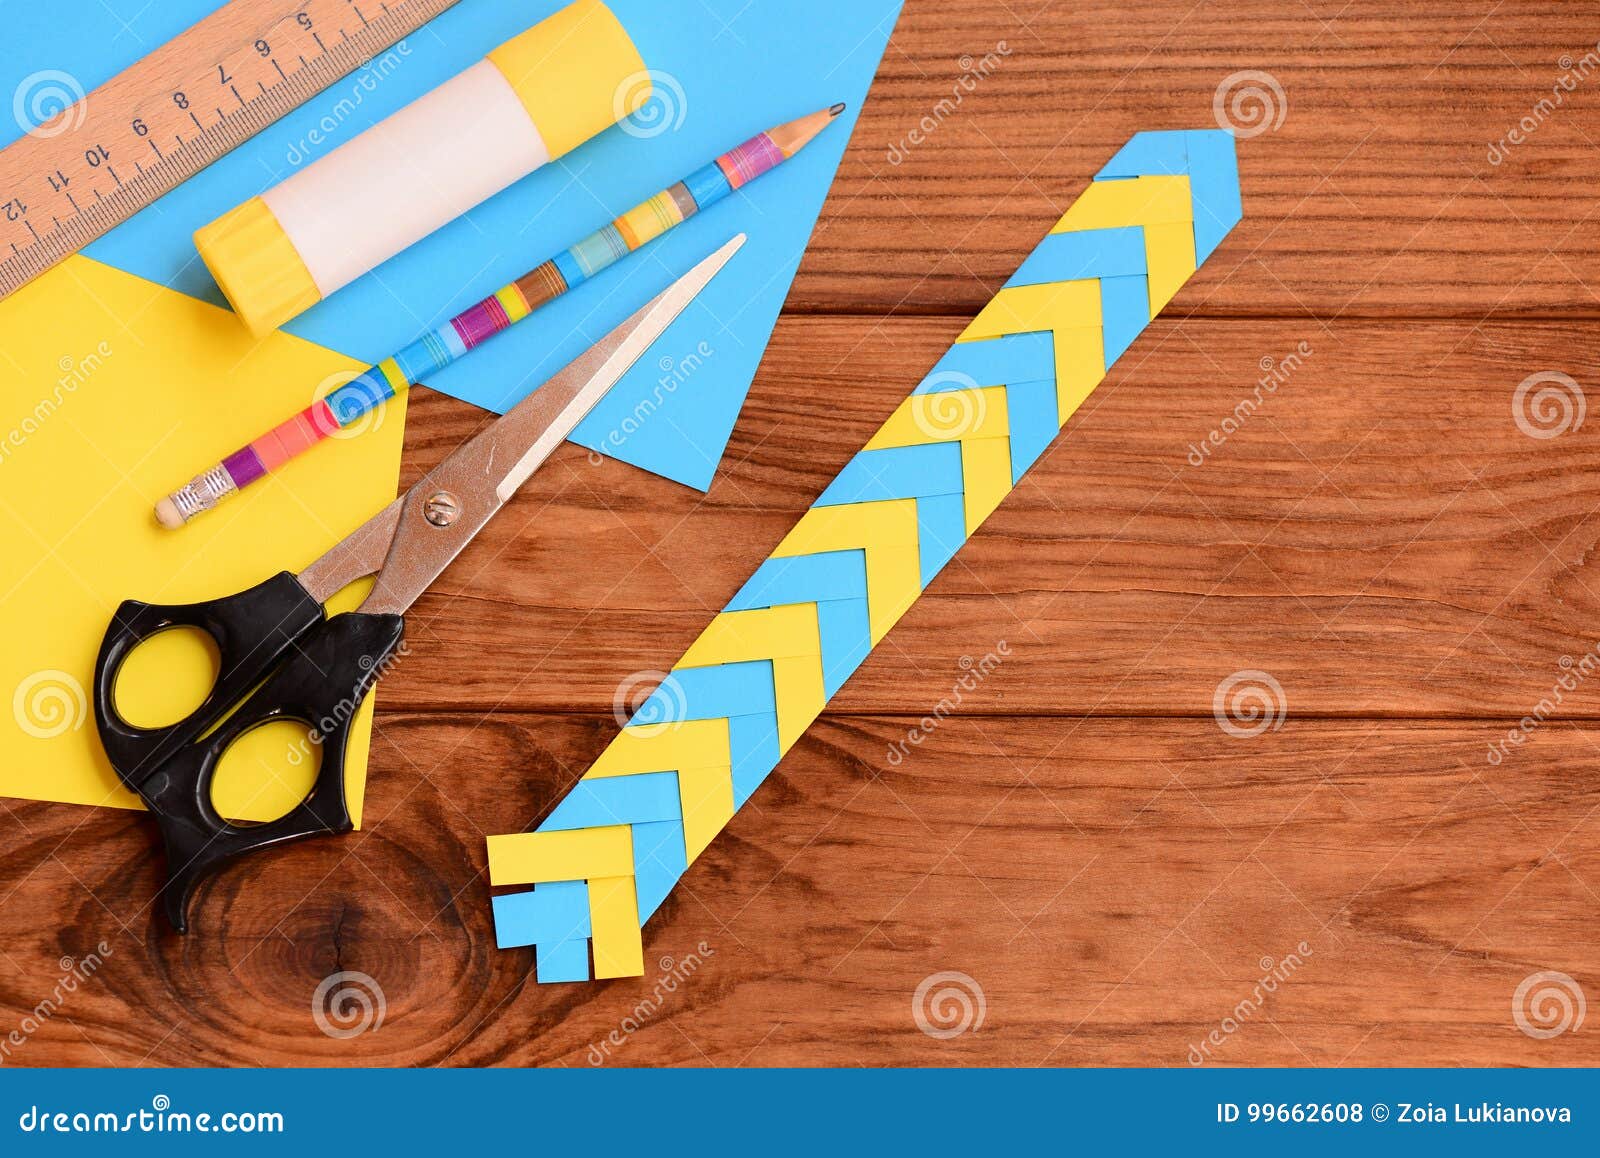 Paper Bookmark for Books or Notebooks. Simple Paper Crafts for Preschoolers  and Schoolchildren Stock Photo - Image of concept, pencil: 99662608